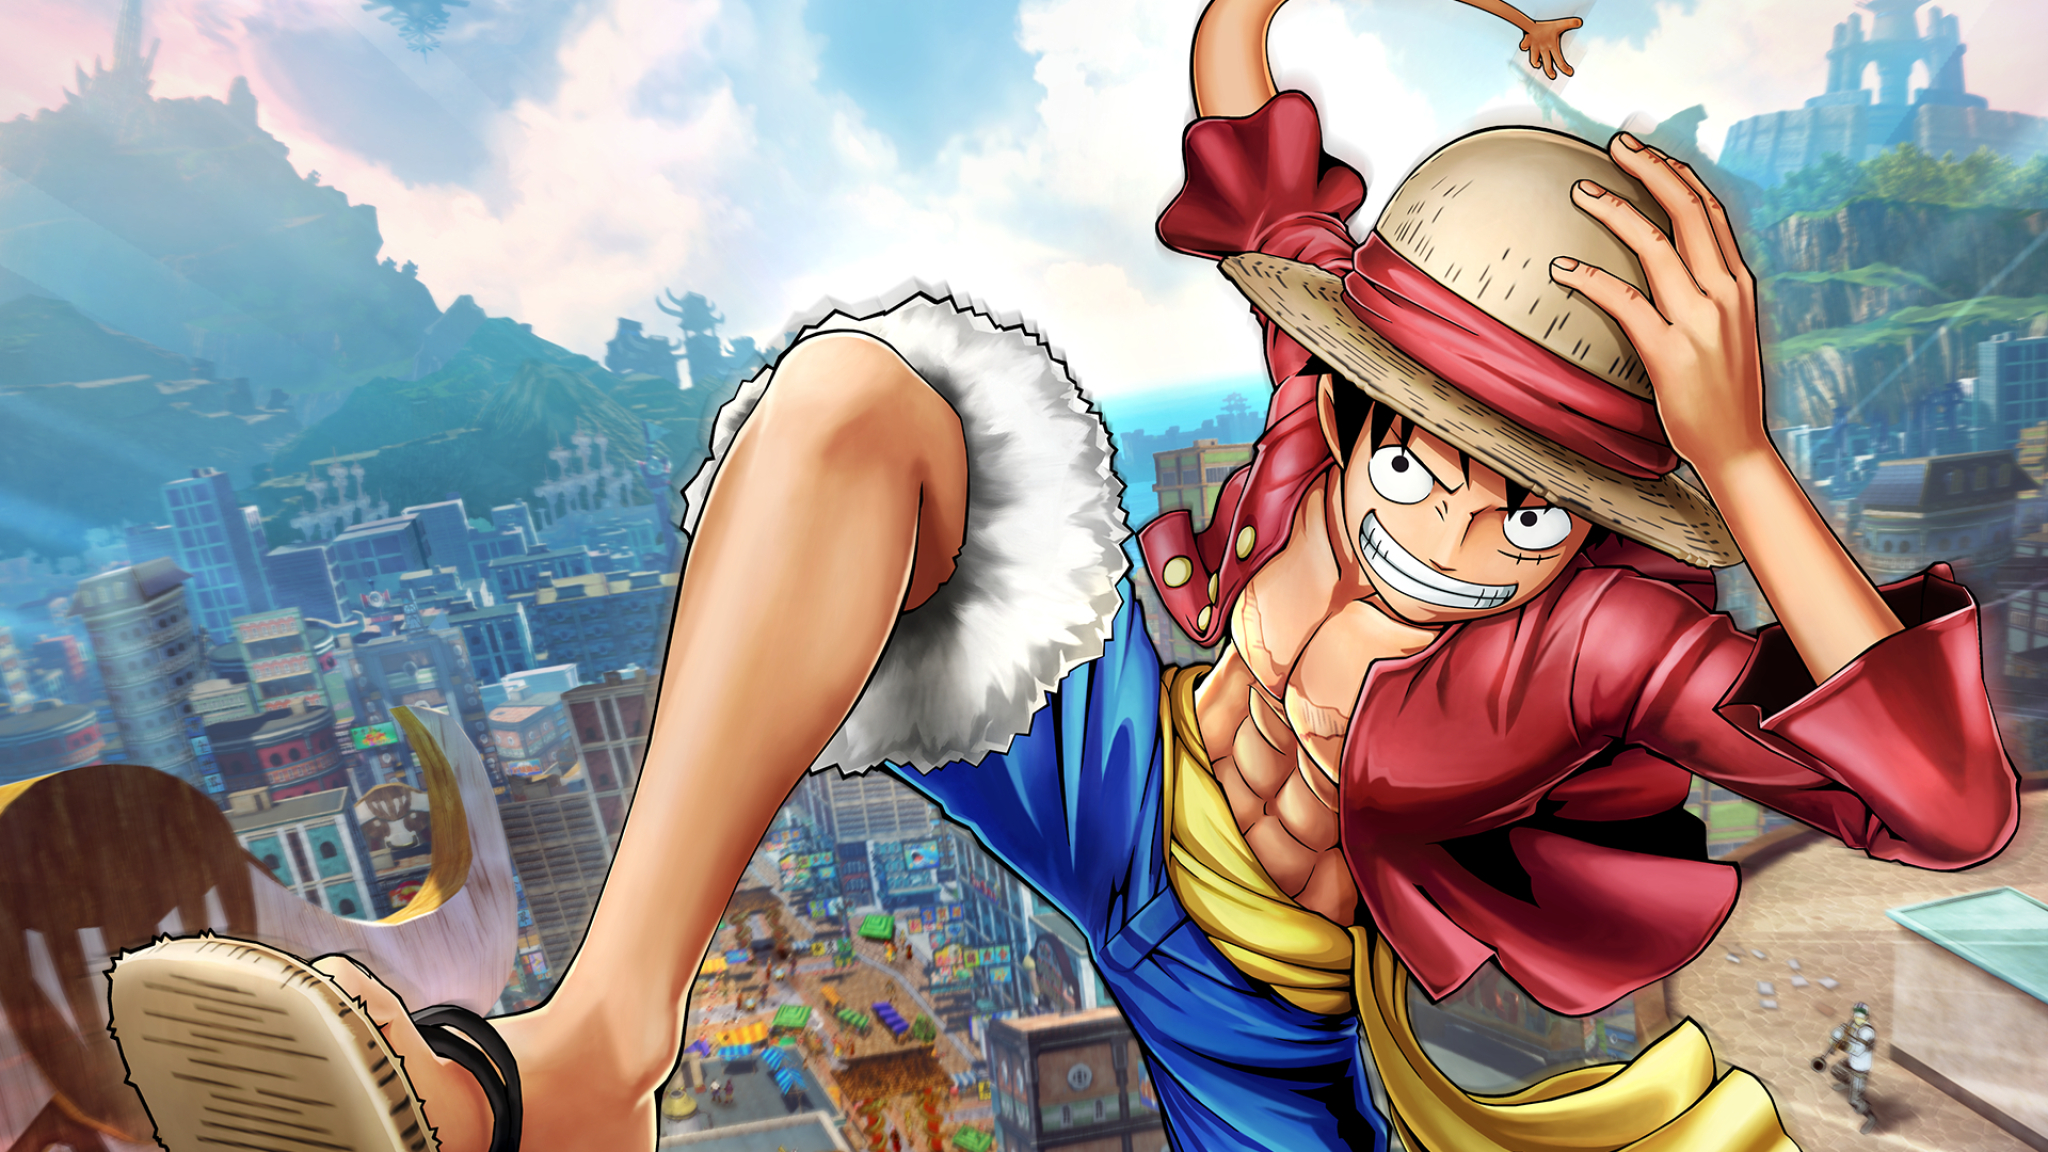 48x1152 One Piece World Seeker 48x1152 Resolution Wallpaper Hd Games 4k Wallpapers Images Photos And Background Wallpapers Den